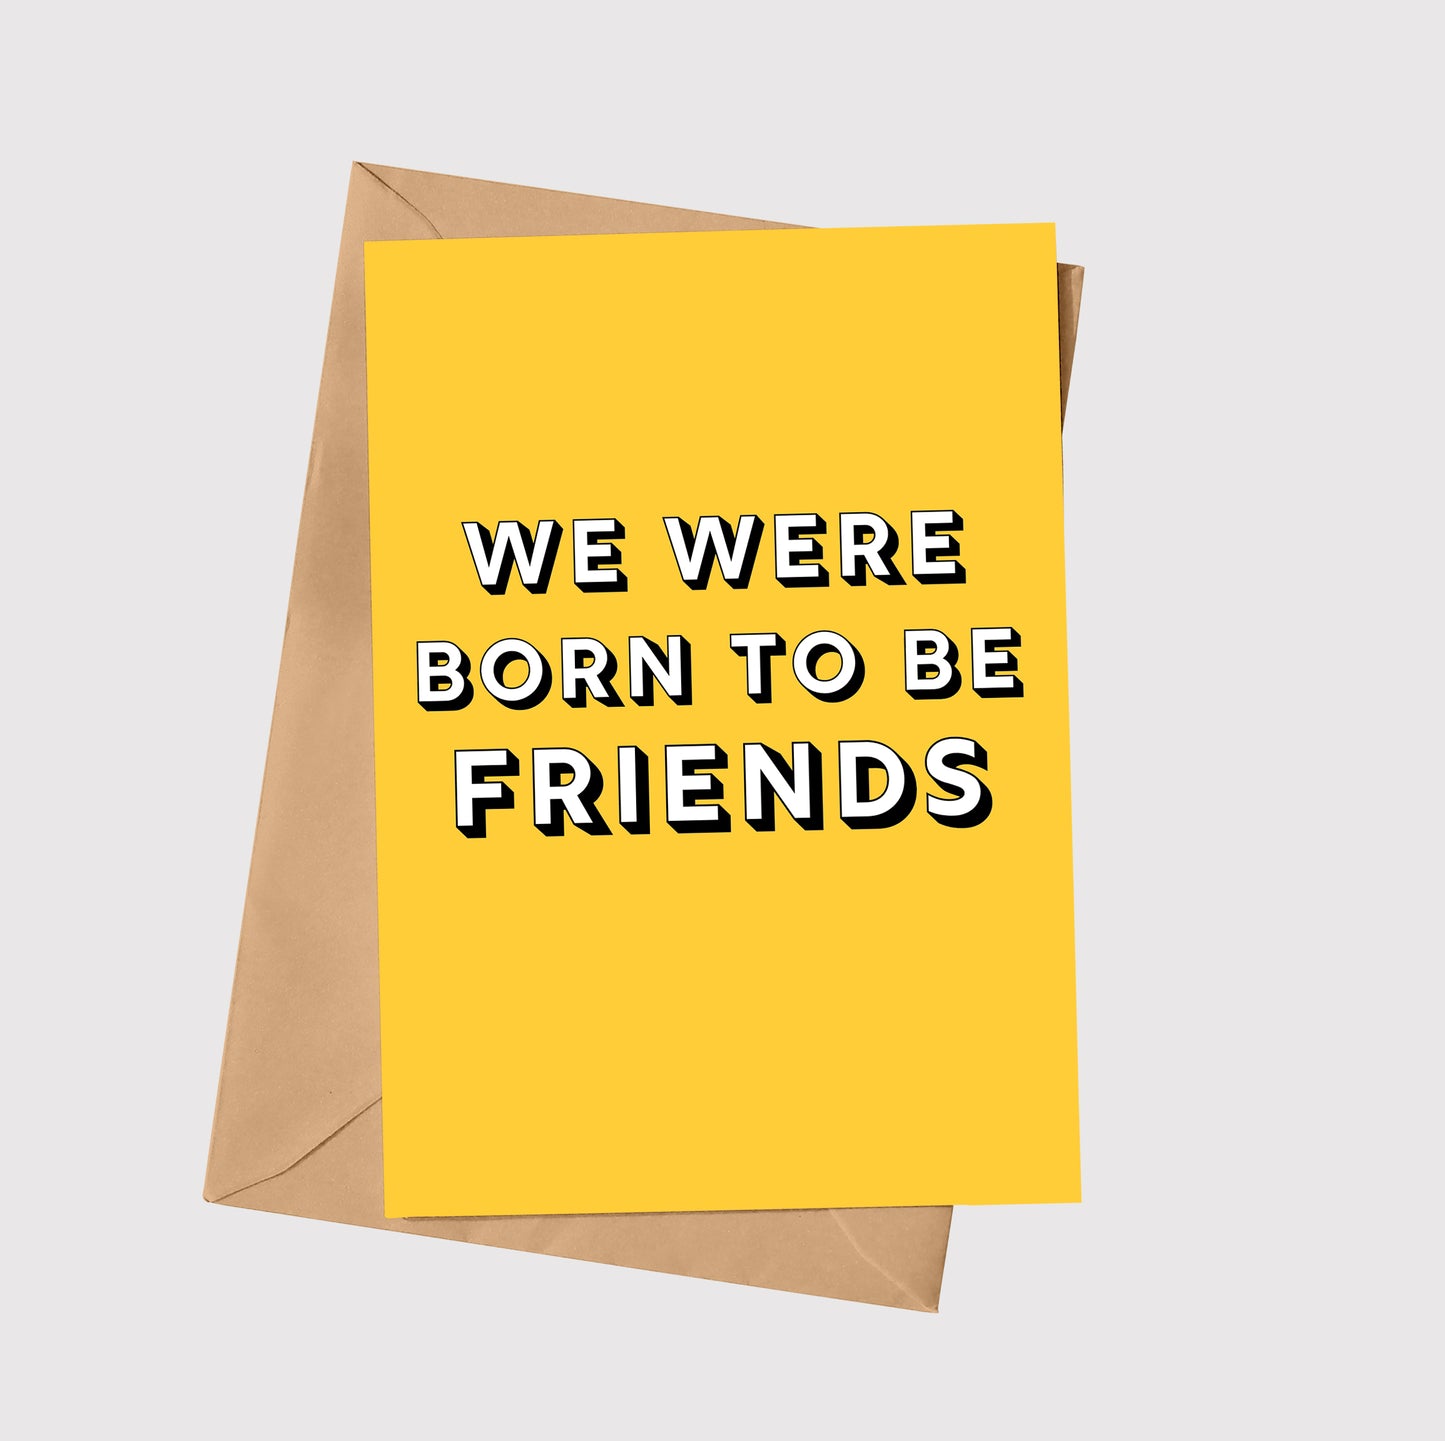 Born to be friends